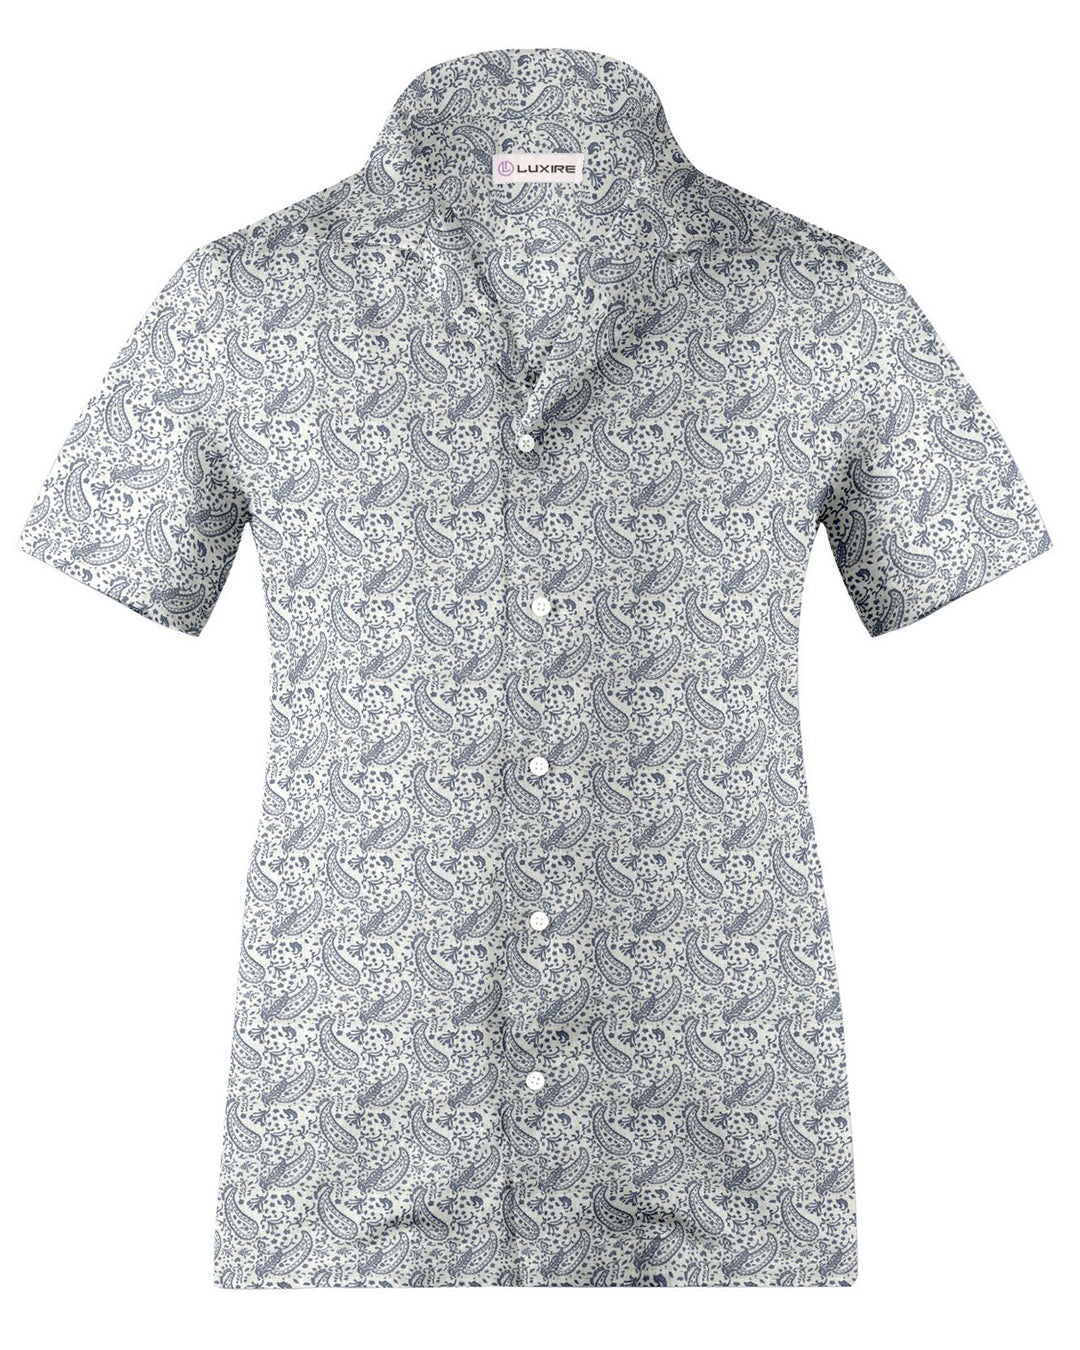 Camp collar PRESET STYLE in Linen: Navy Printed Paisley